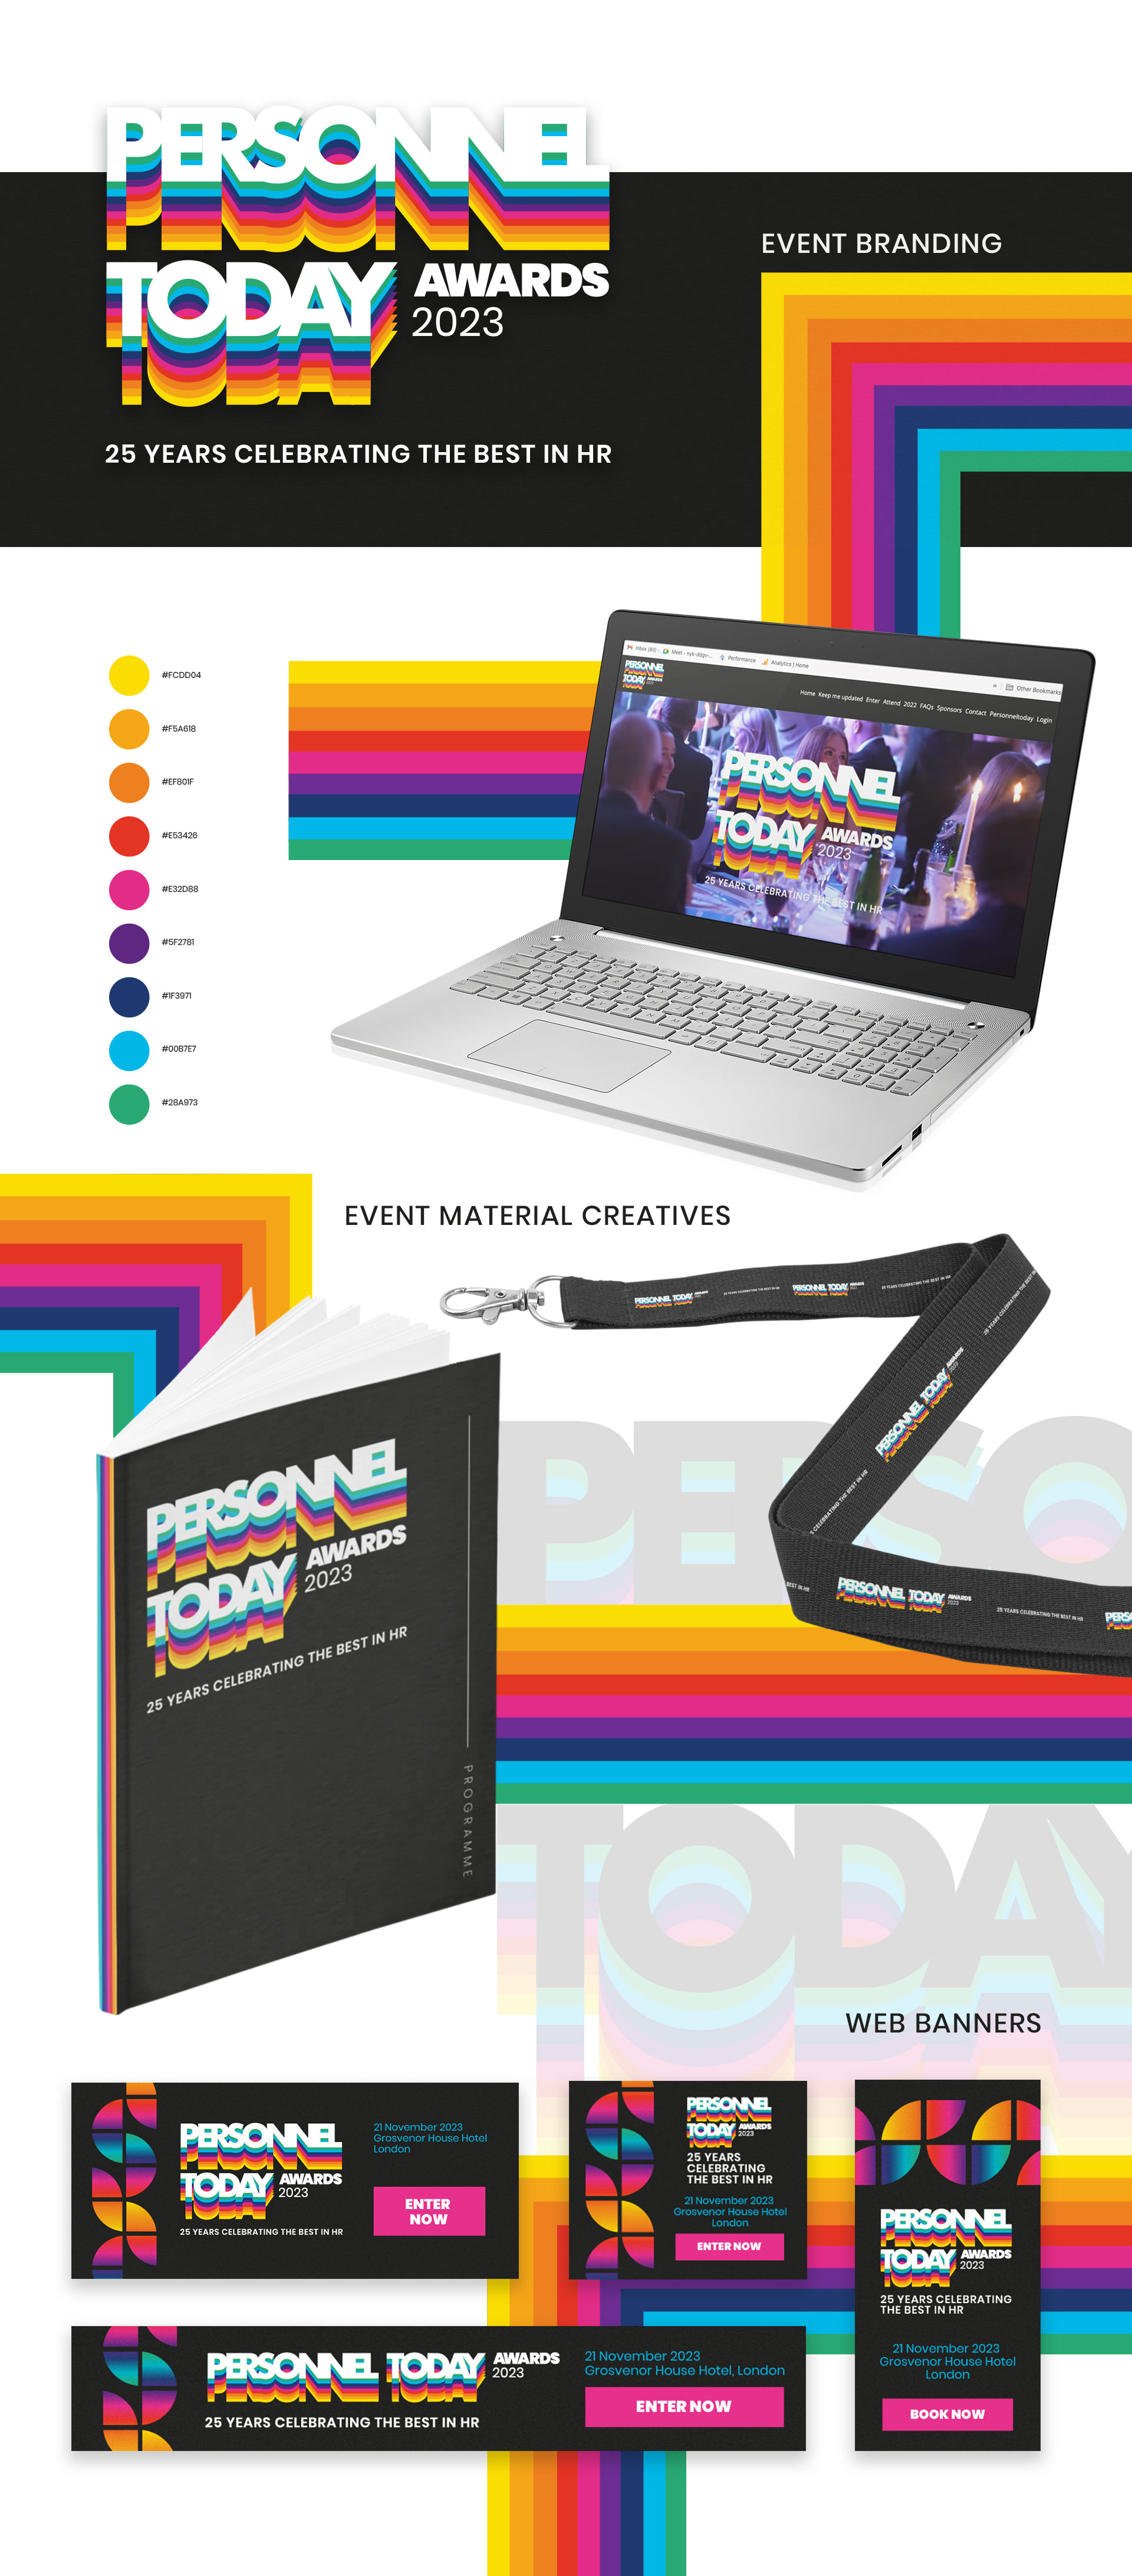 Personnel Today Event Branding  Materials